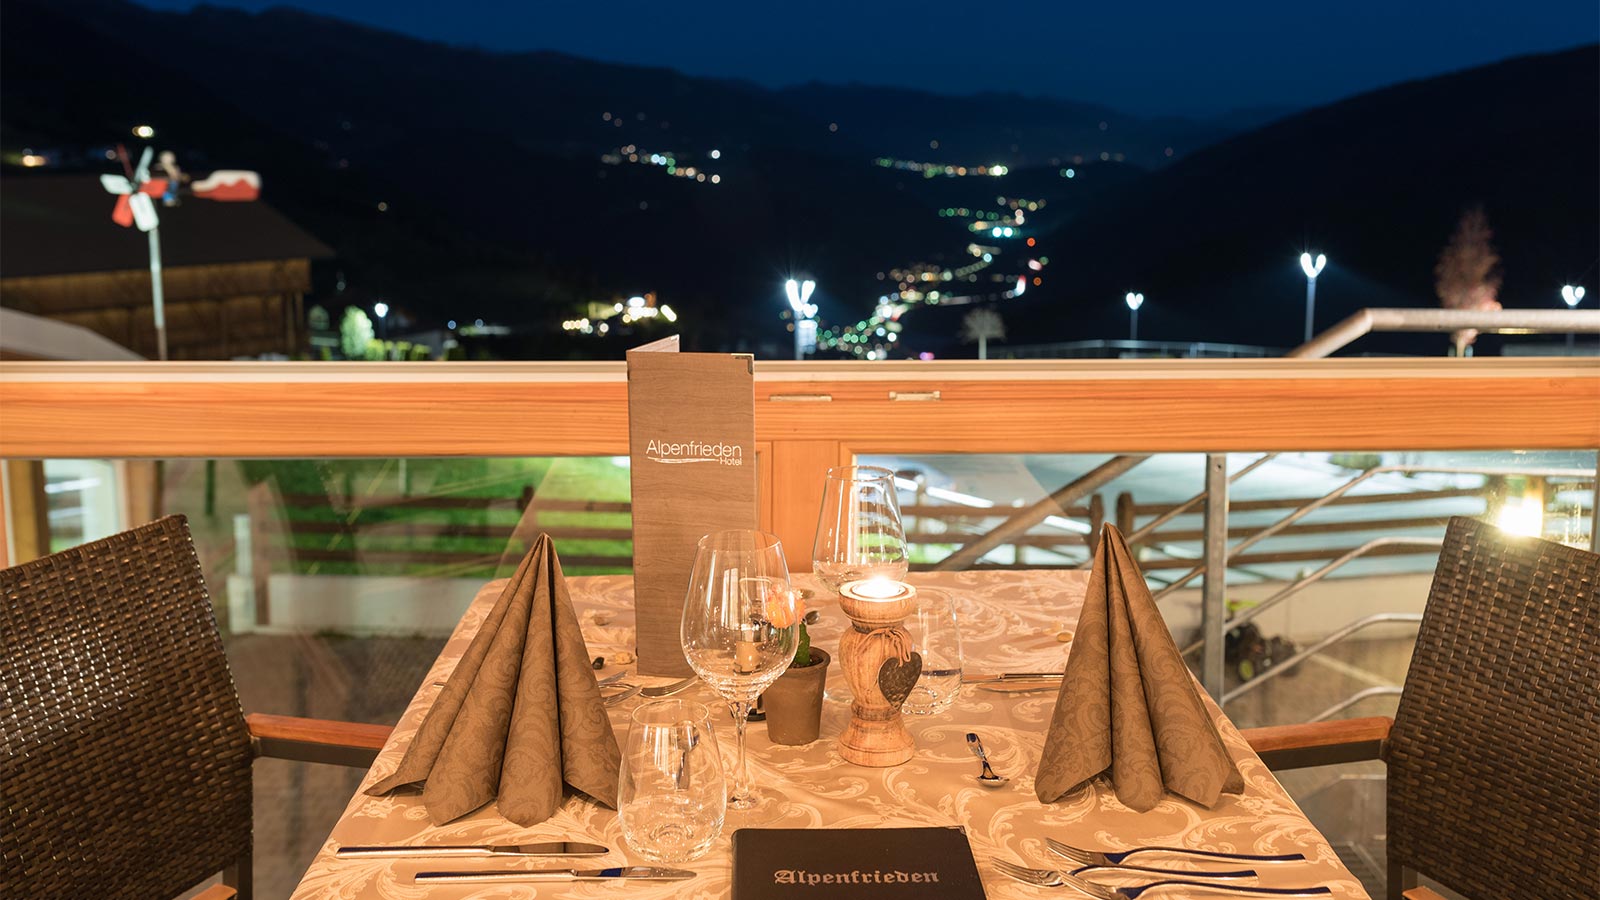 a prepared dining table on the terrace at Hotel Alpenfrieden on a warm summer night